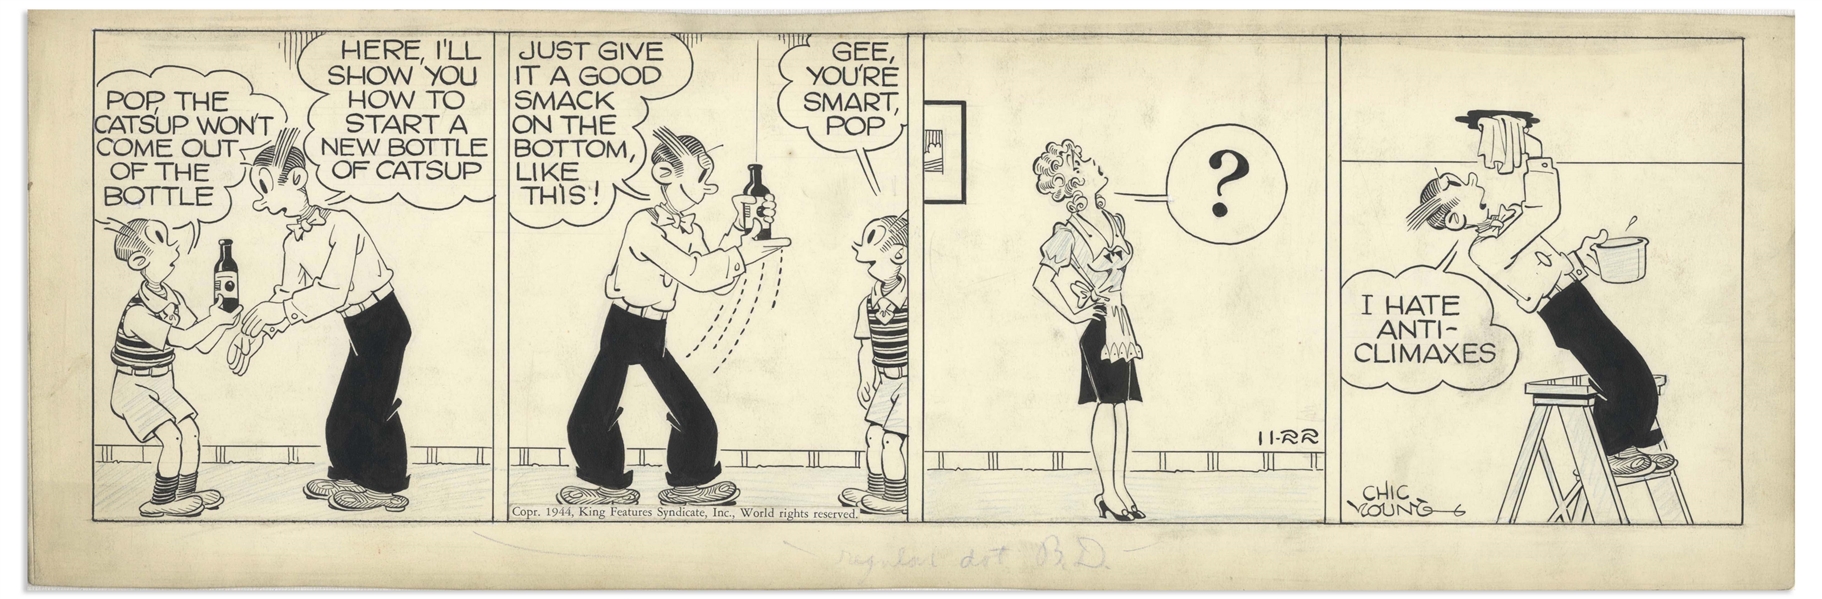 Chic Young Hand-Drawn ''Blondie'' Comic Strip From 1944 Titled ''Ceiling Price on Genius!'' -- Pop Goes the Catsup!